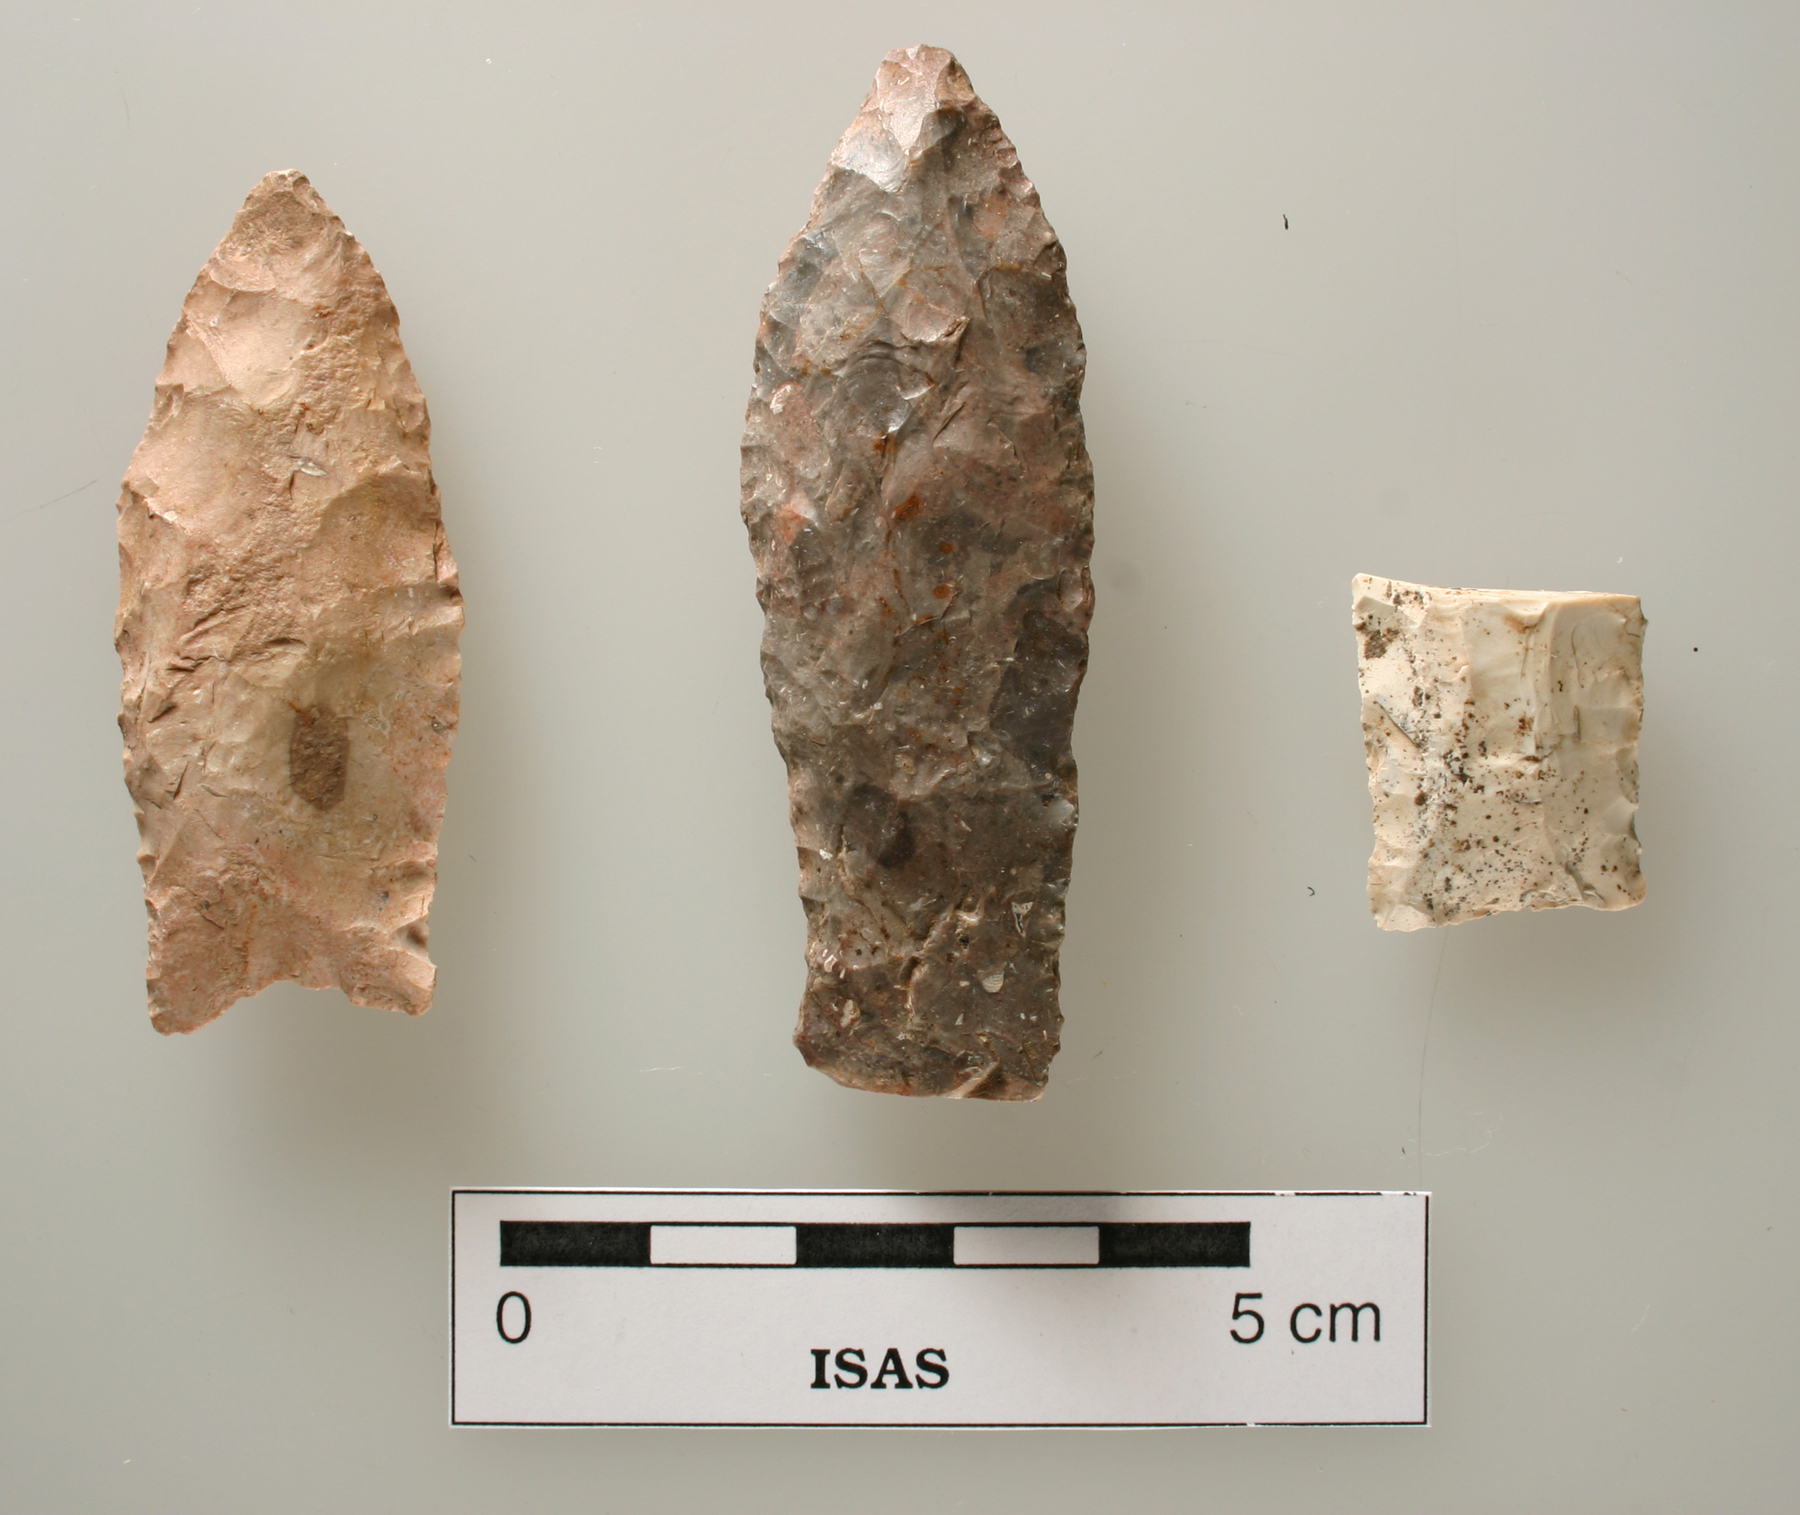 Early and Late archaic points donated by George Johnson to ISAS Photo credit: Marcia L. Martinho